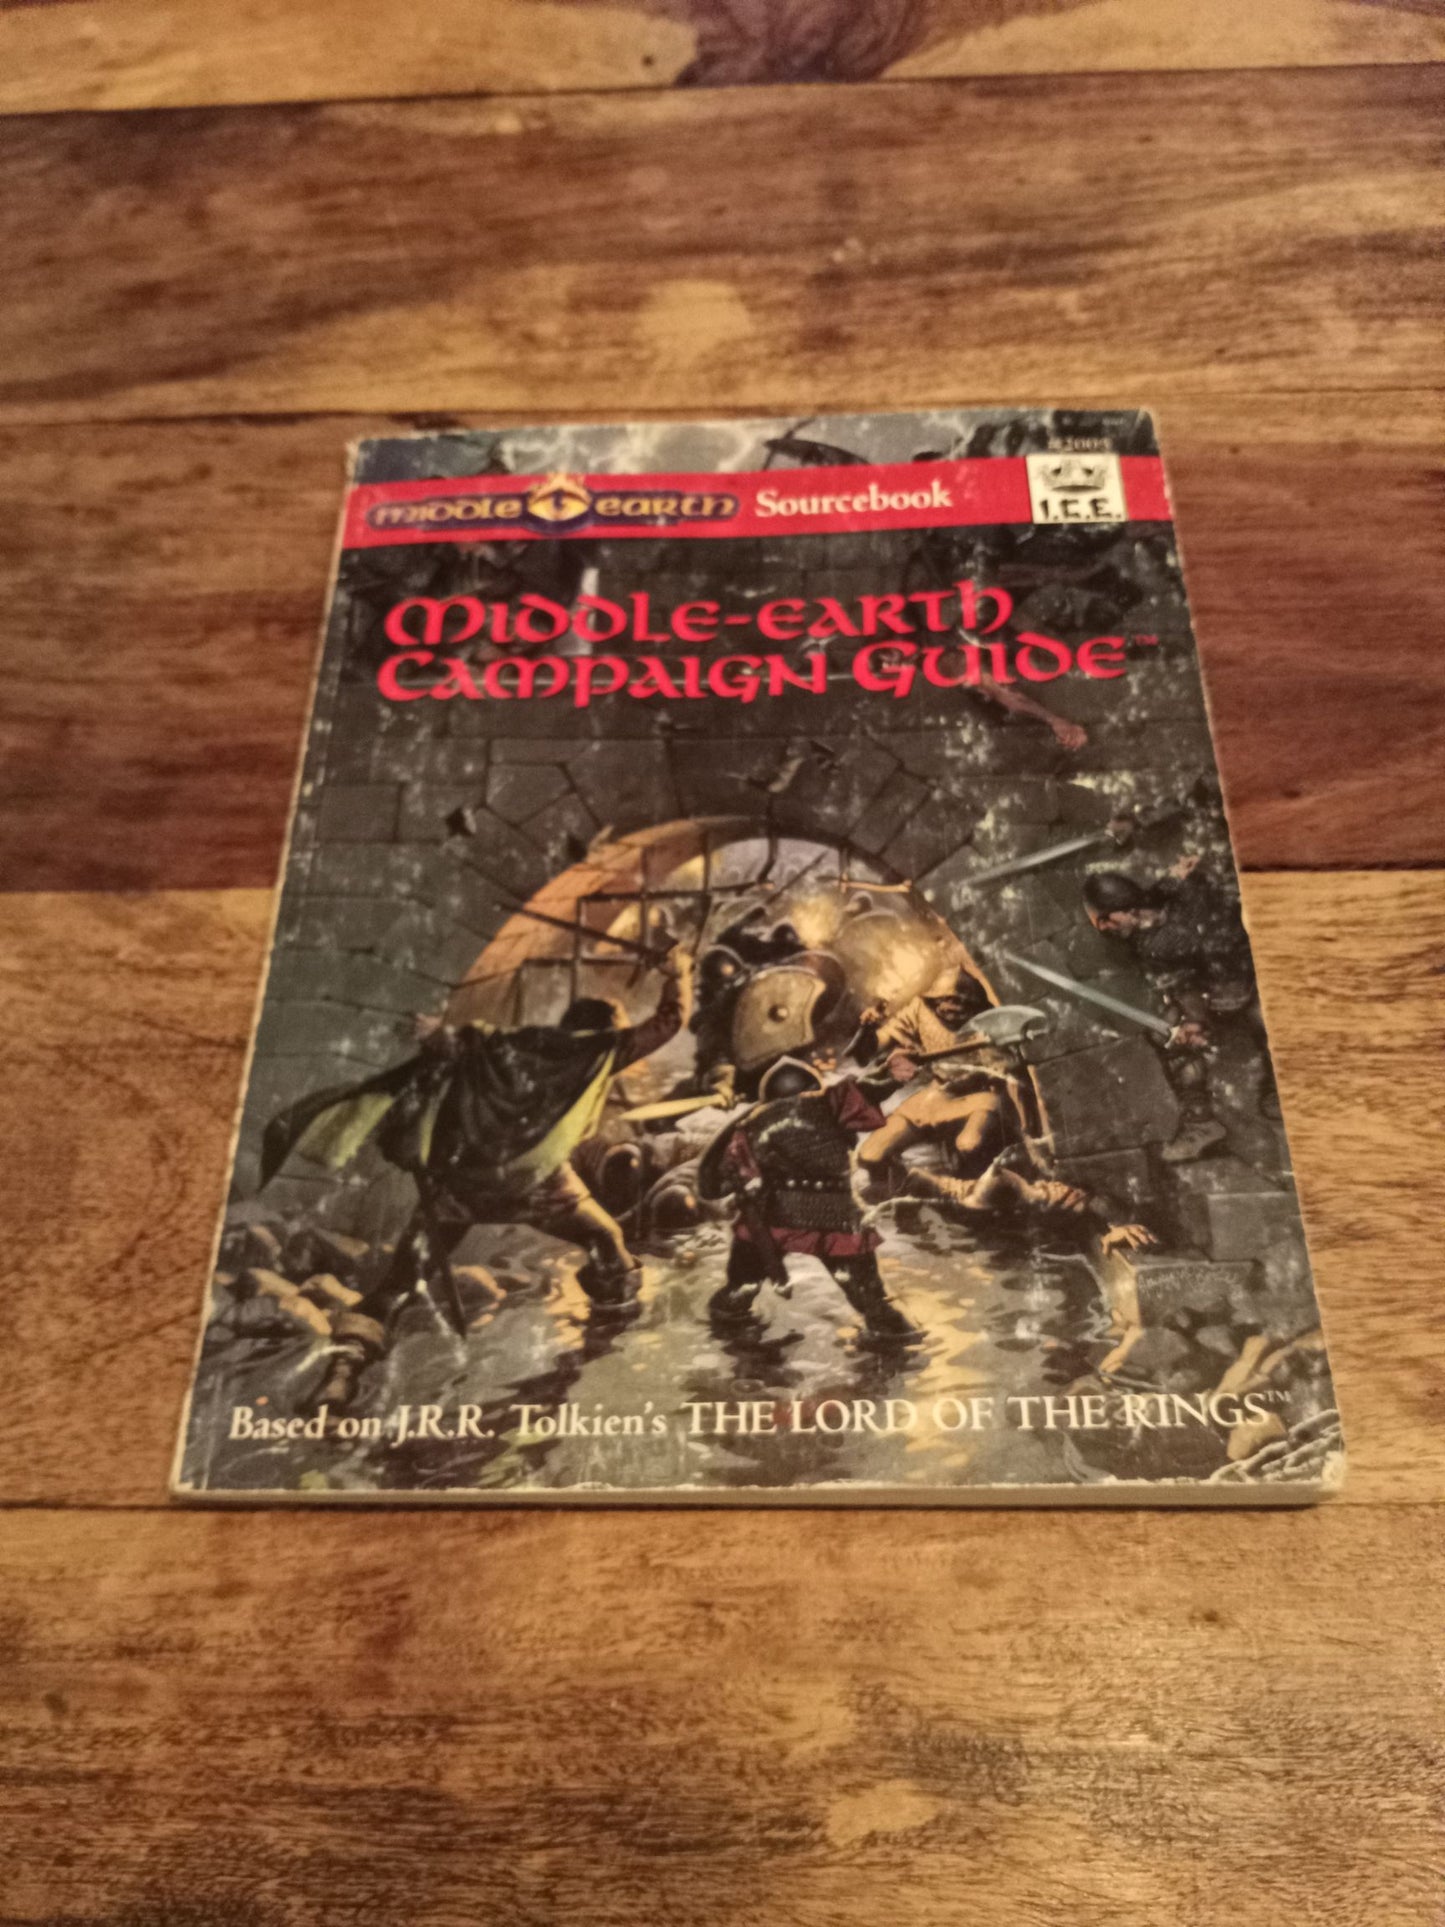 Middle-Earth Campaign Guide Middle Earth Role Playing 1st Ed I.C.E. #2003 No Map MERP 1990